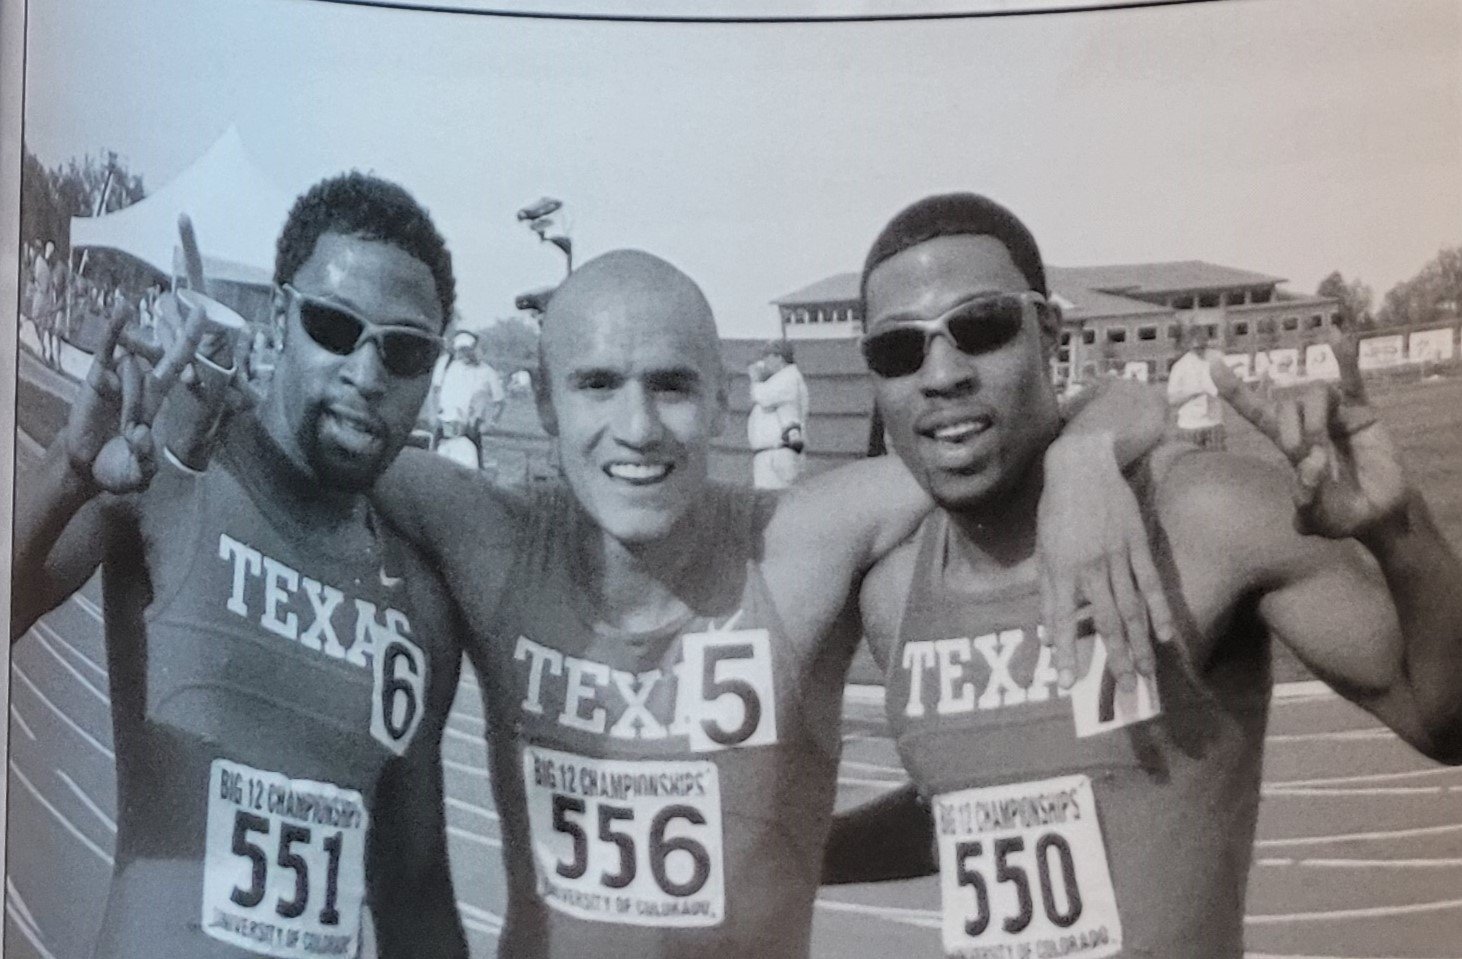  2009 men's track combines all three places 1,2,3, in the Big 12 conference.  Tevas Everett was 3rd, Jacob Hernandez was 1st, and Tevan Everett was 2nd 